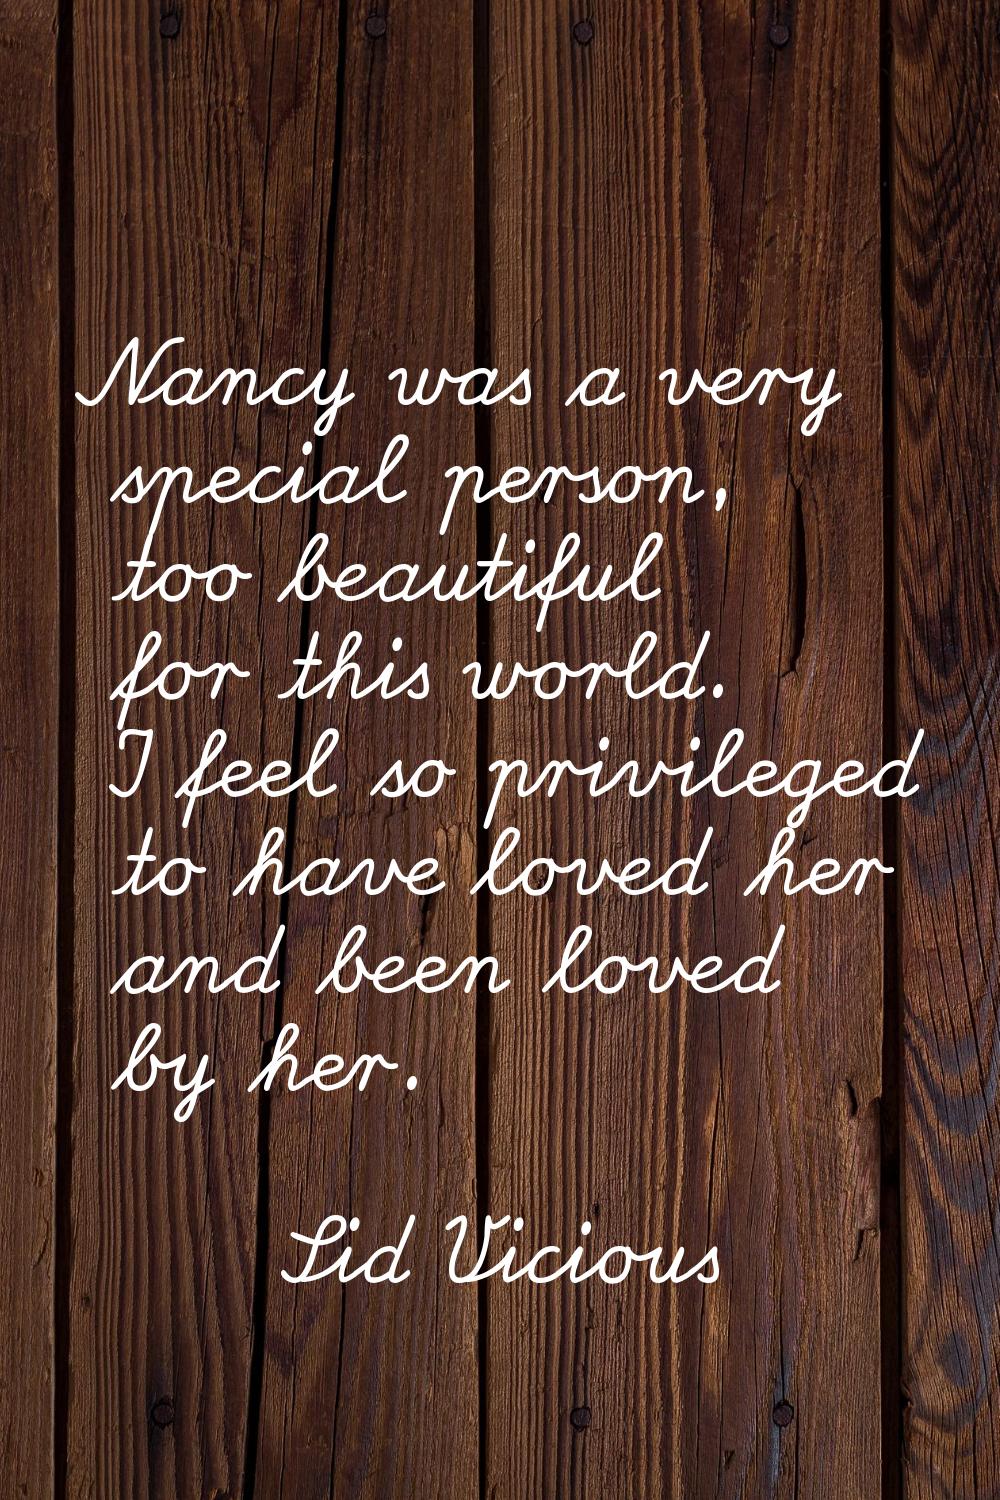 Nancy was a very special person, too beautiful for this world. I feel so privileged to have loved h